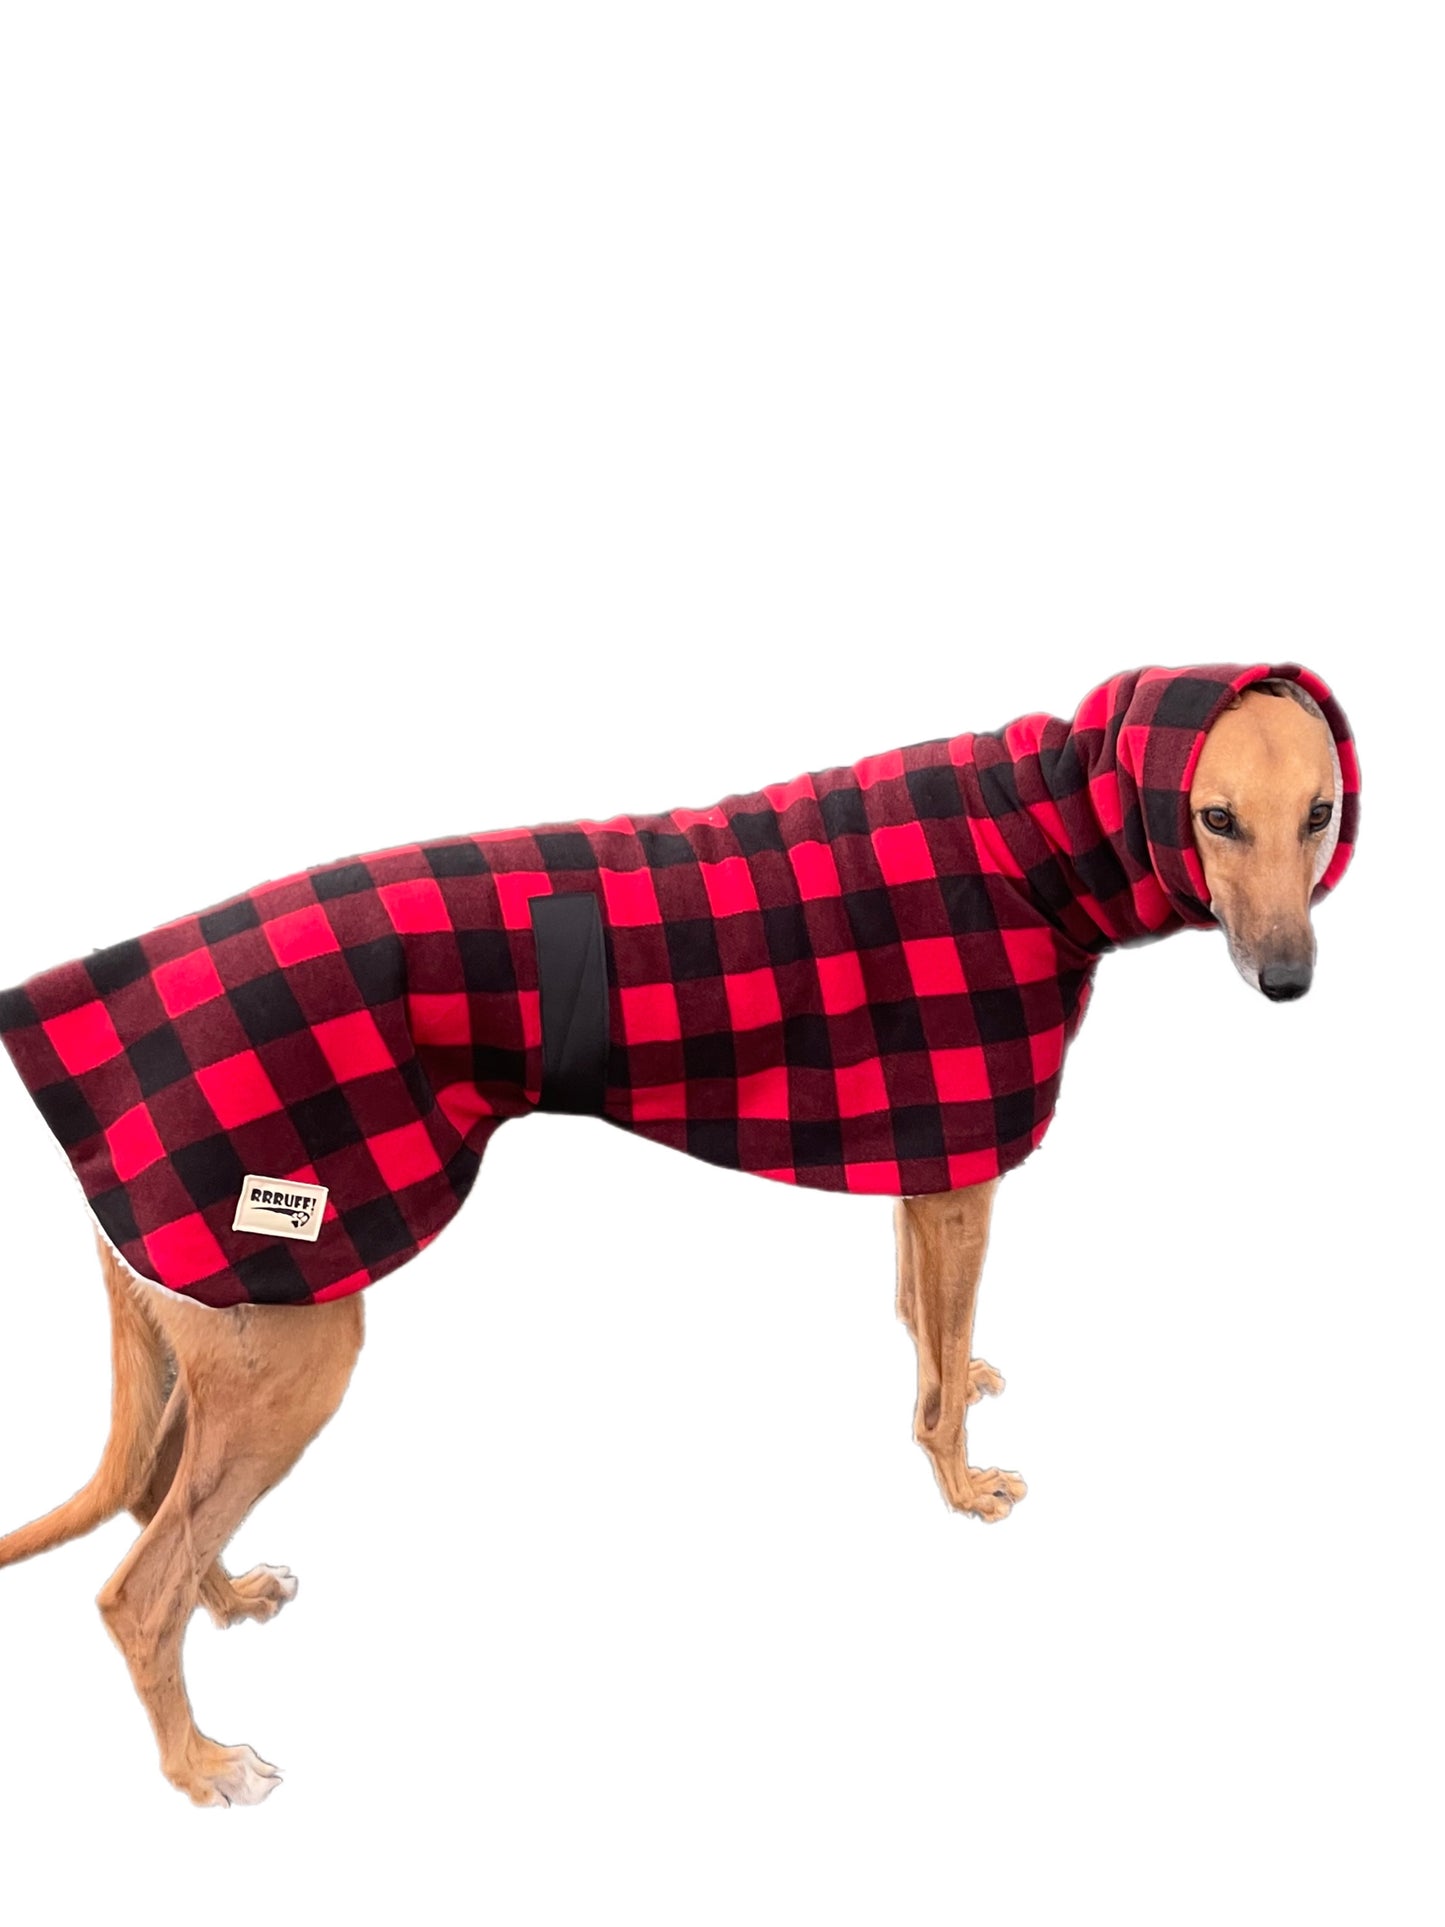 The red Lumberjack Greyhound coat in deluxe style rug red black tartan check  polar fleece washable extra wide neck